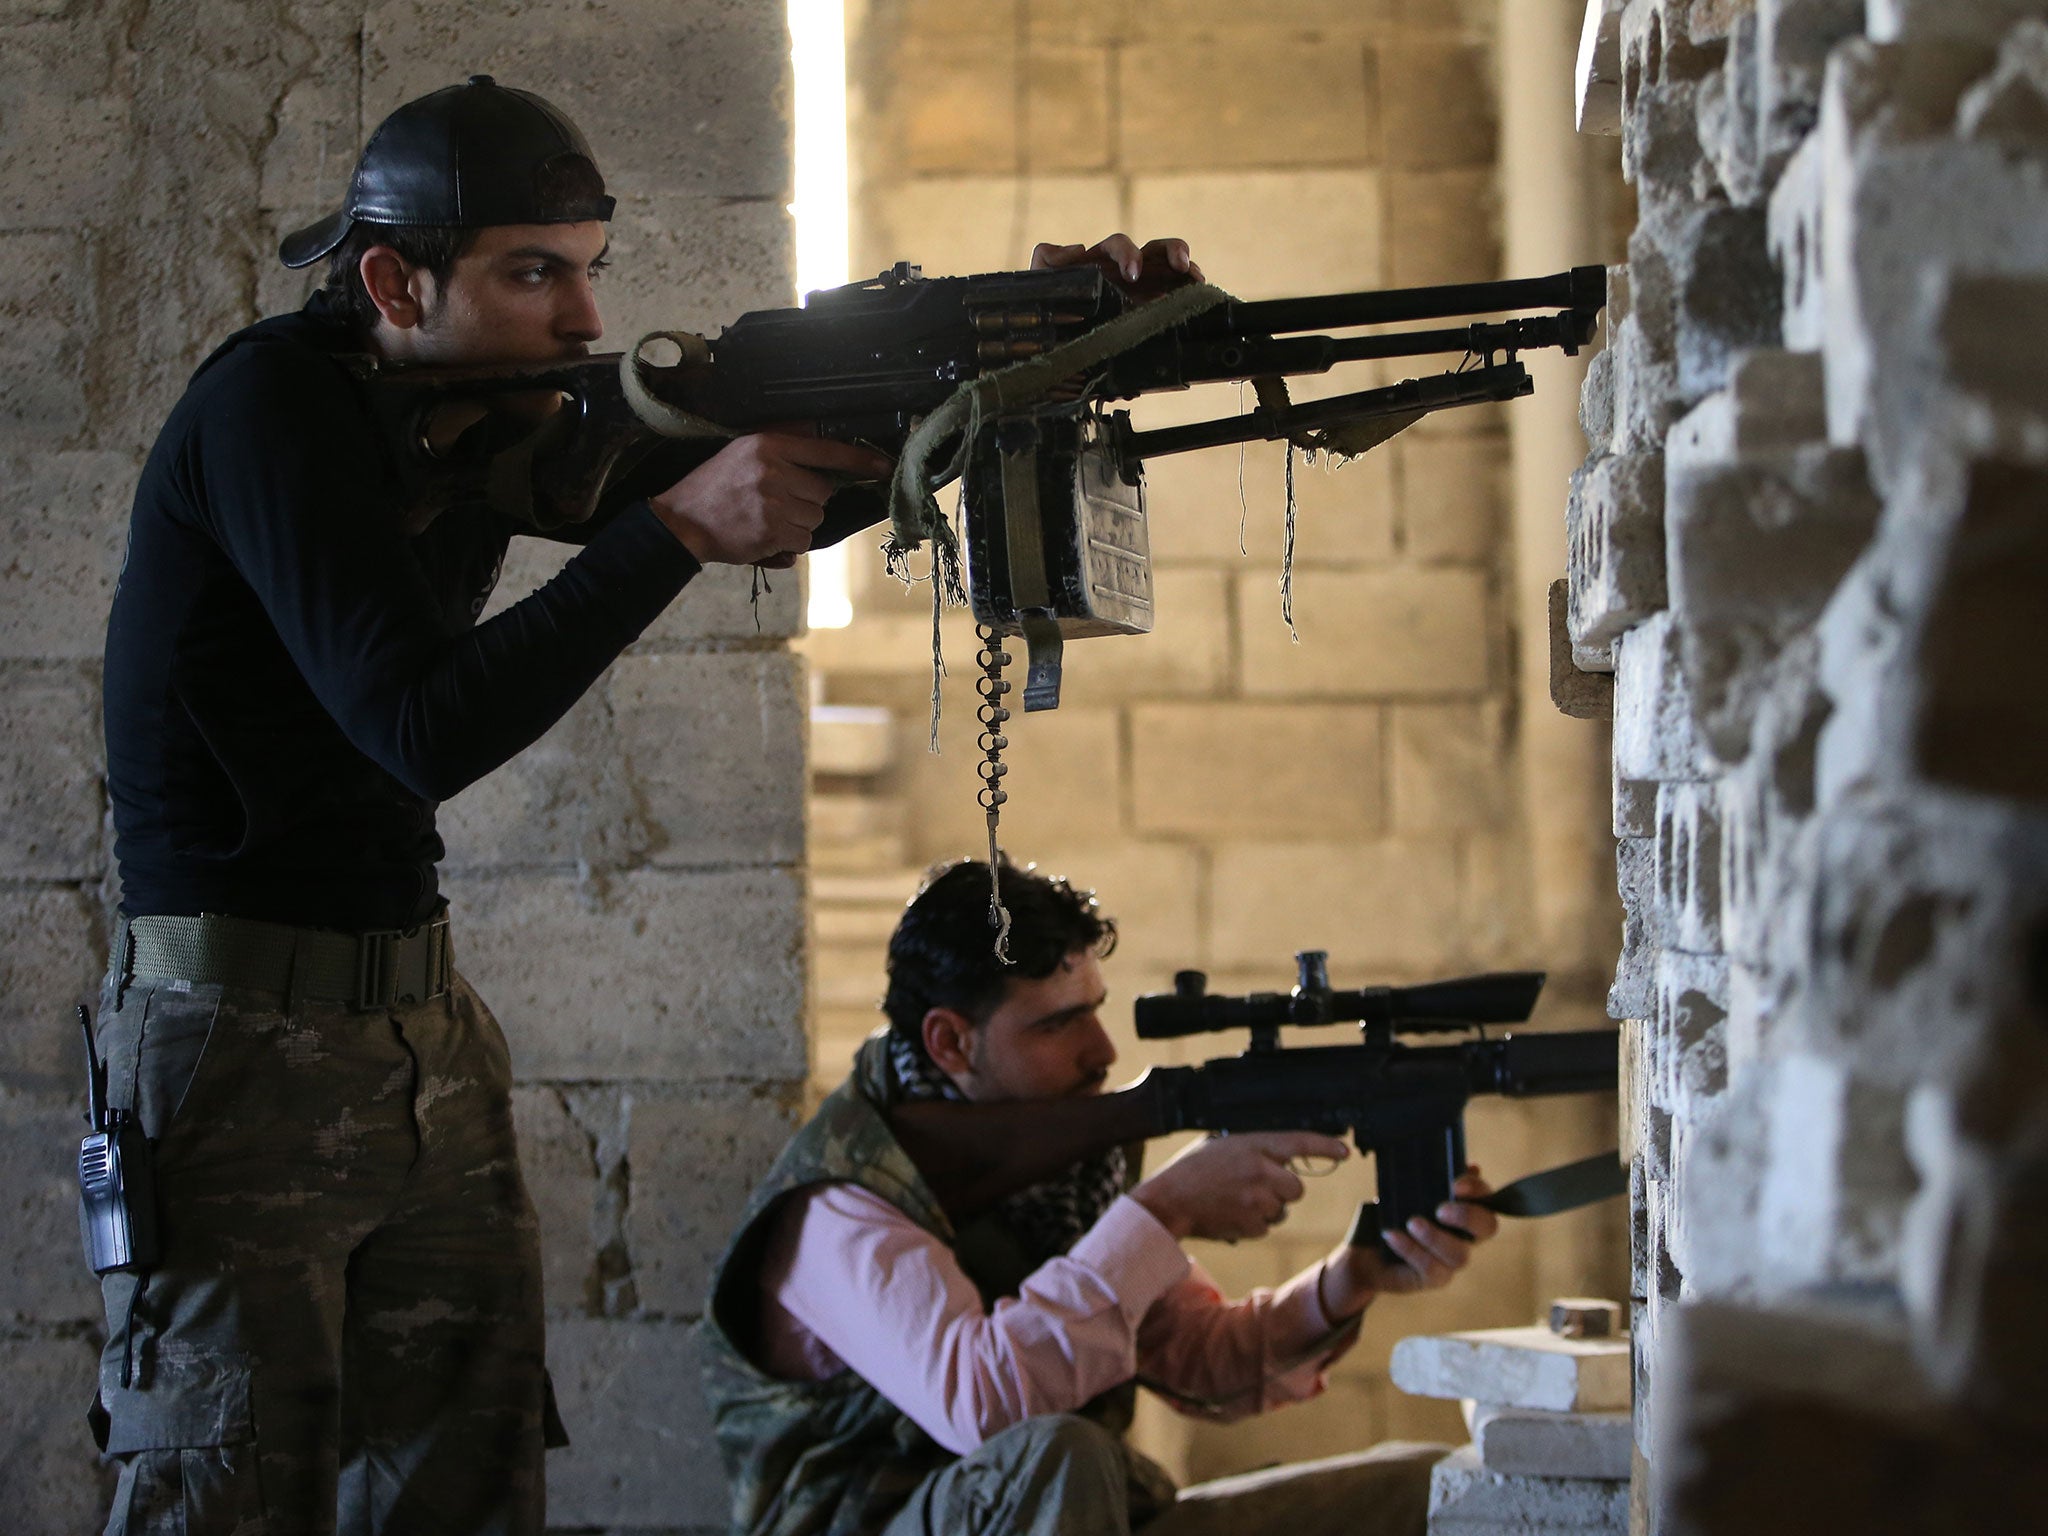 Free Syrian Army fighters take on the Syrian military in the town of Maarat al-Nuaman